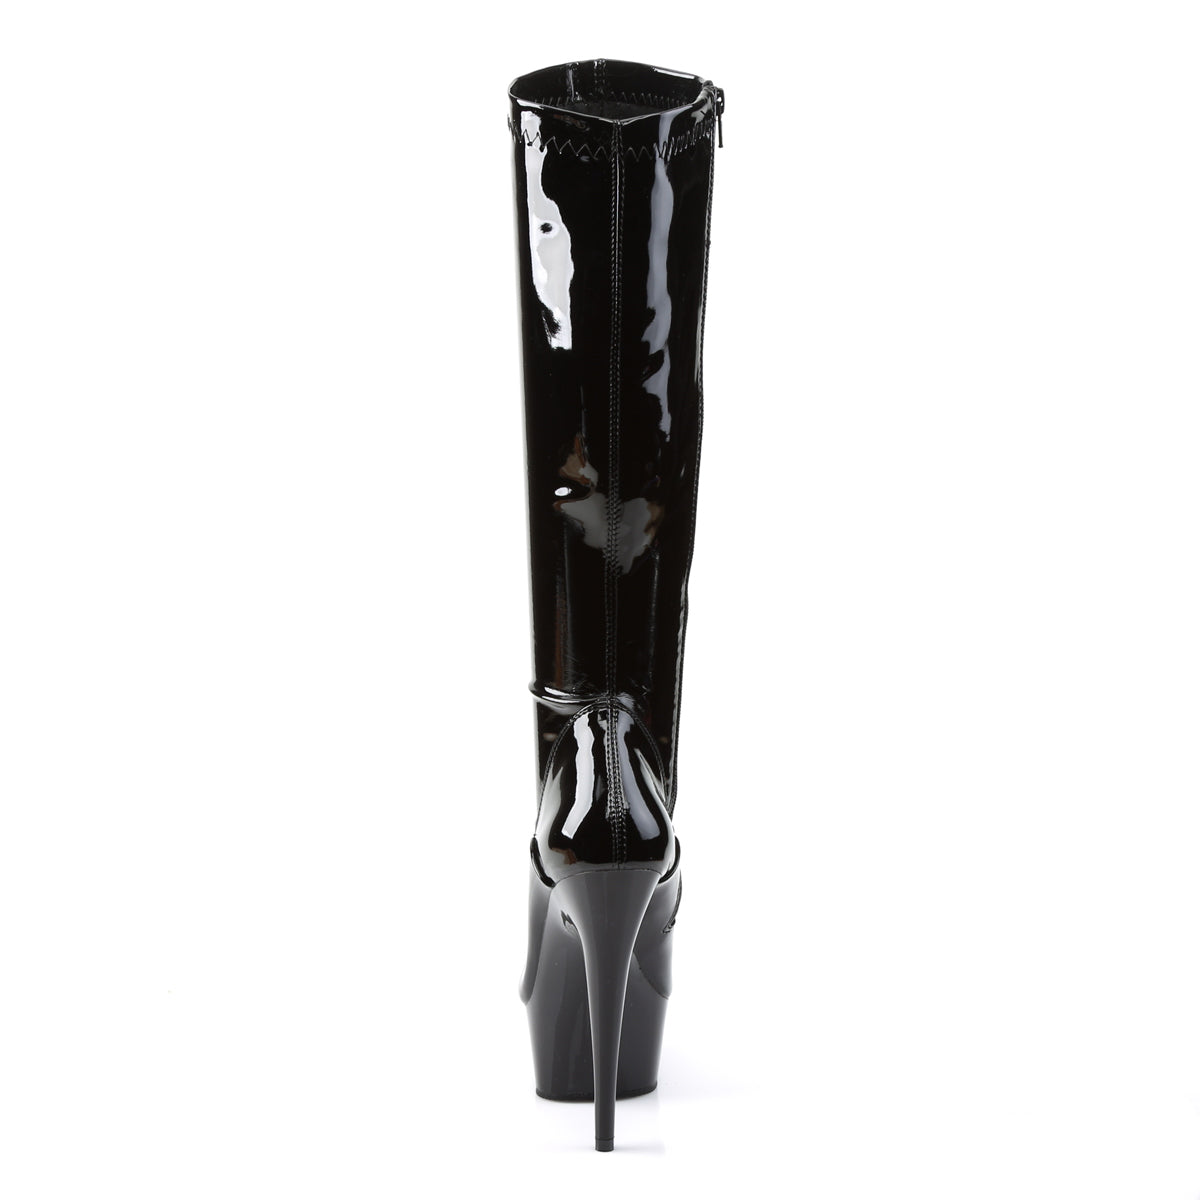 DELIGHT-2000 Pleaser Black Stretch Patent/Black Platform Shoes [Sexy Knee High Boots]